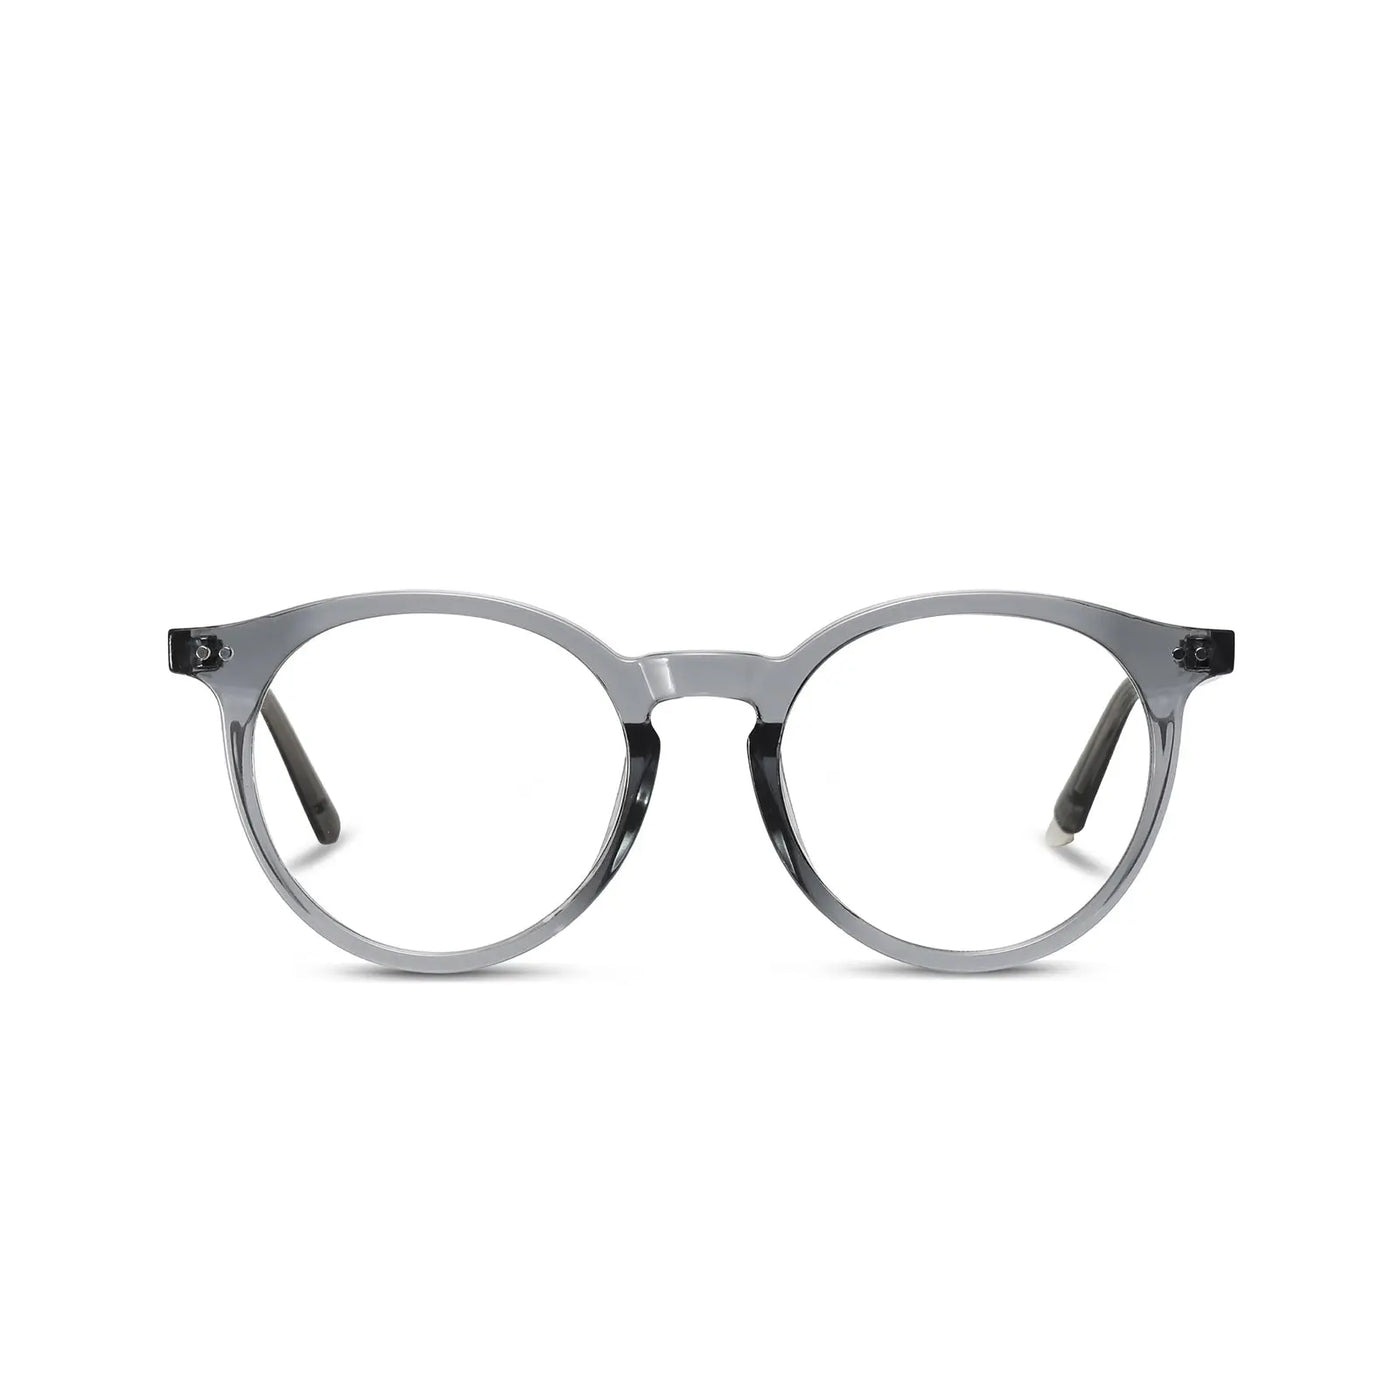 DUCO GLASSES-The right kind of shady DUCO Superlight Blue Light Blocking Computer Gaming Glasses for Women 5217 New DUCO Blue light